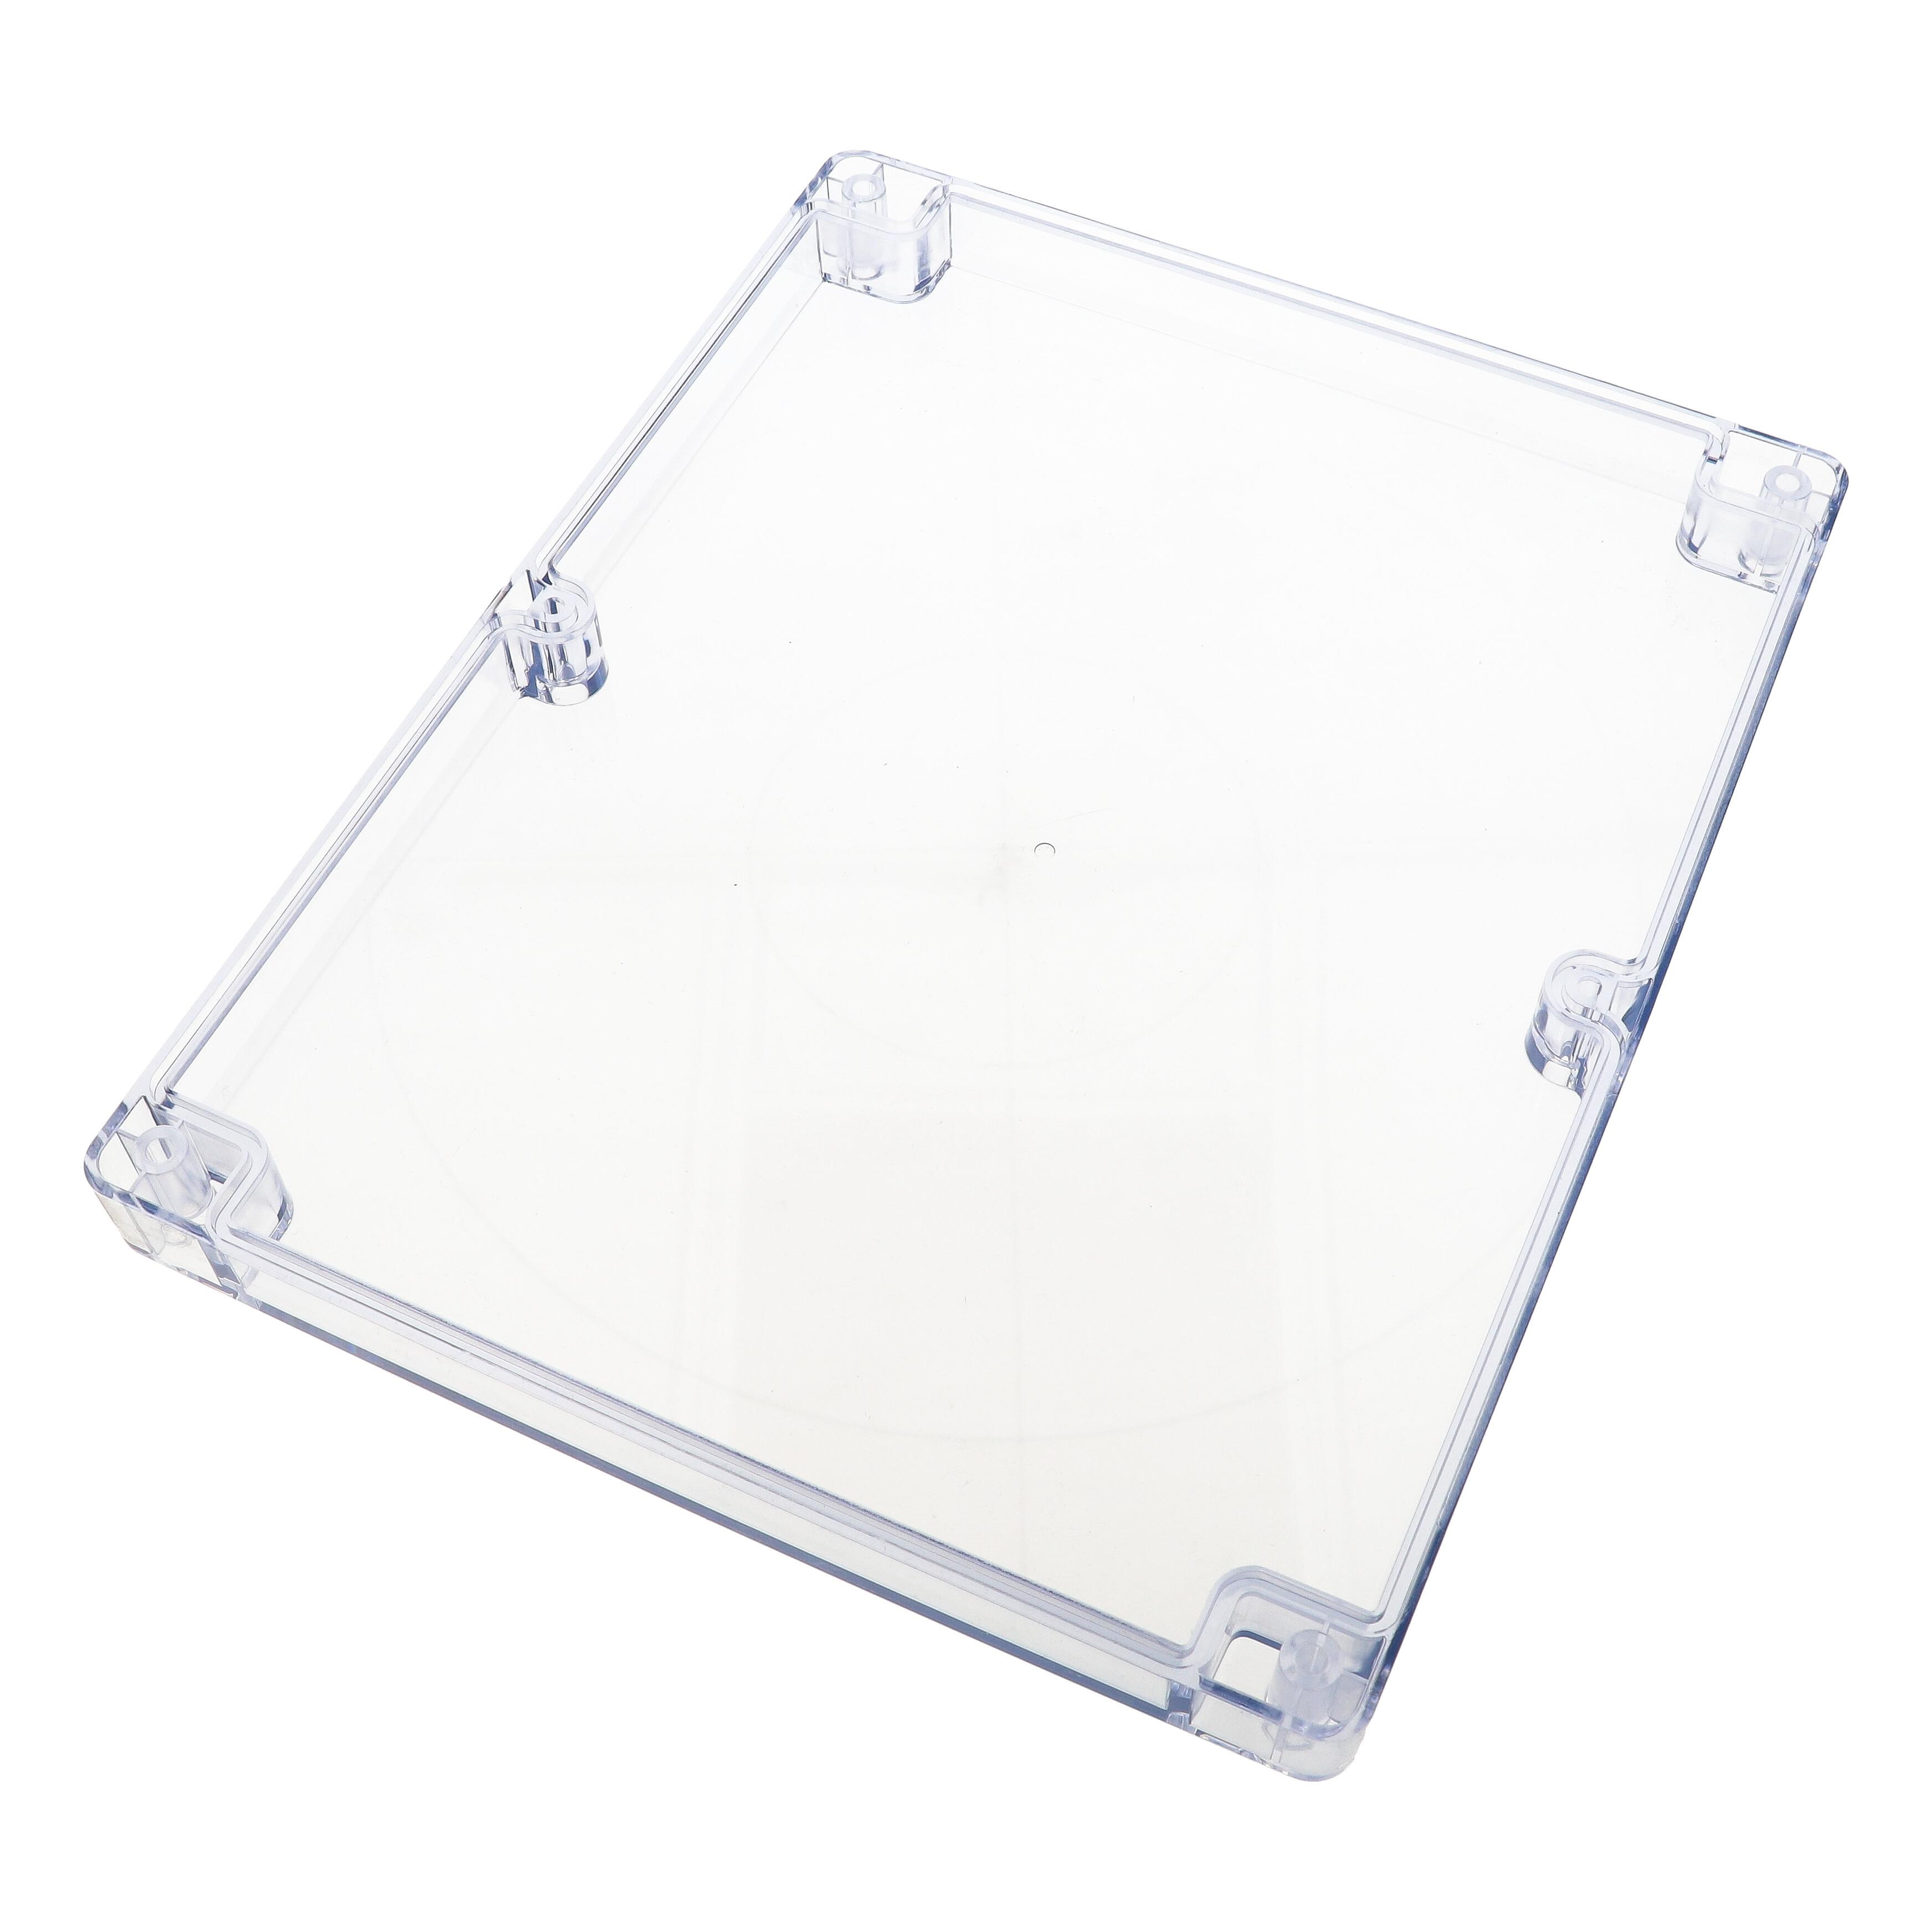 【1554BCL】CLEAR PC LID ONLY